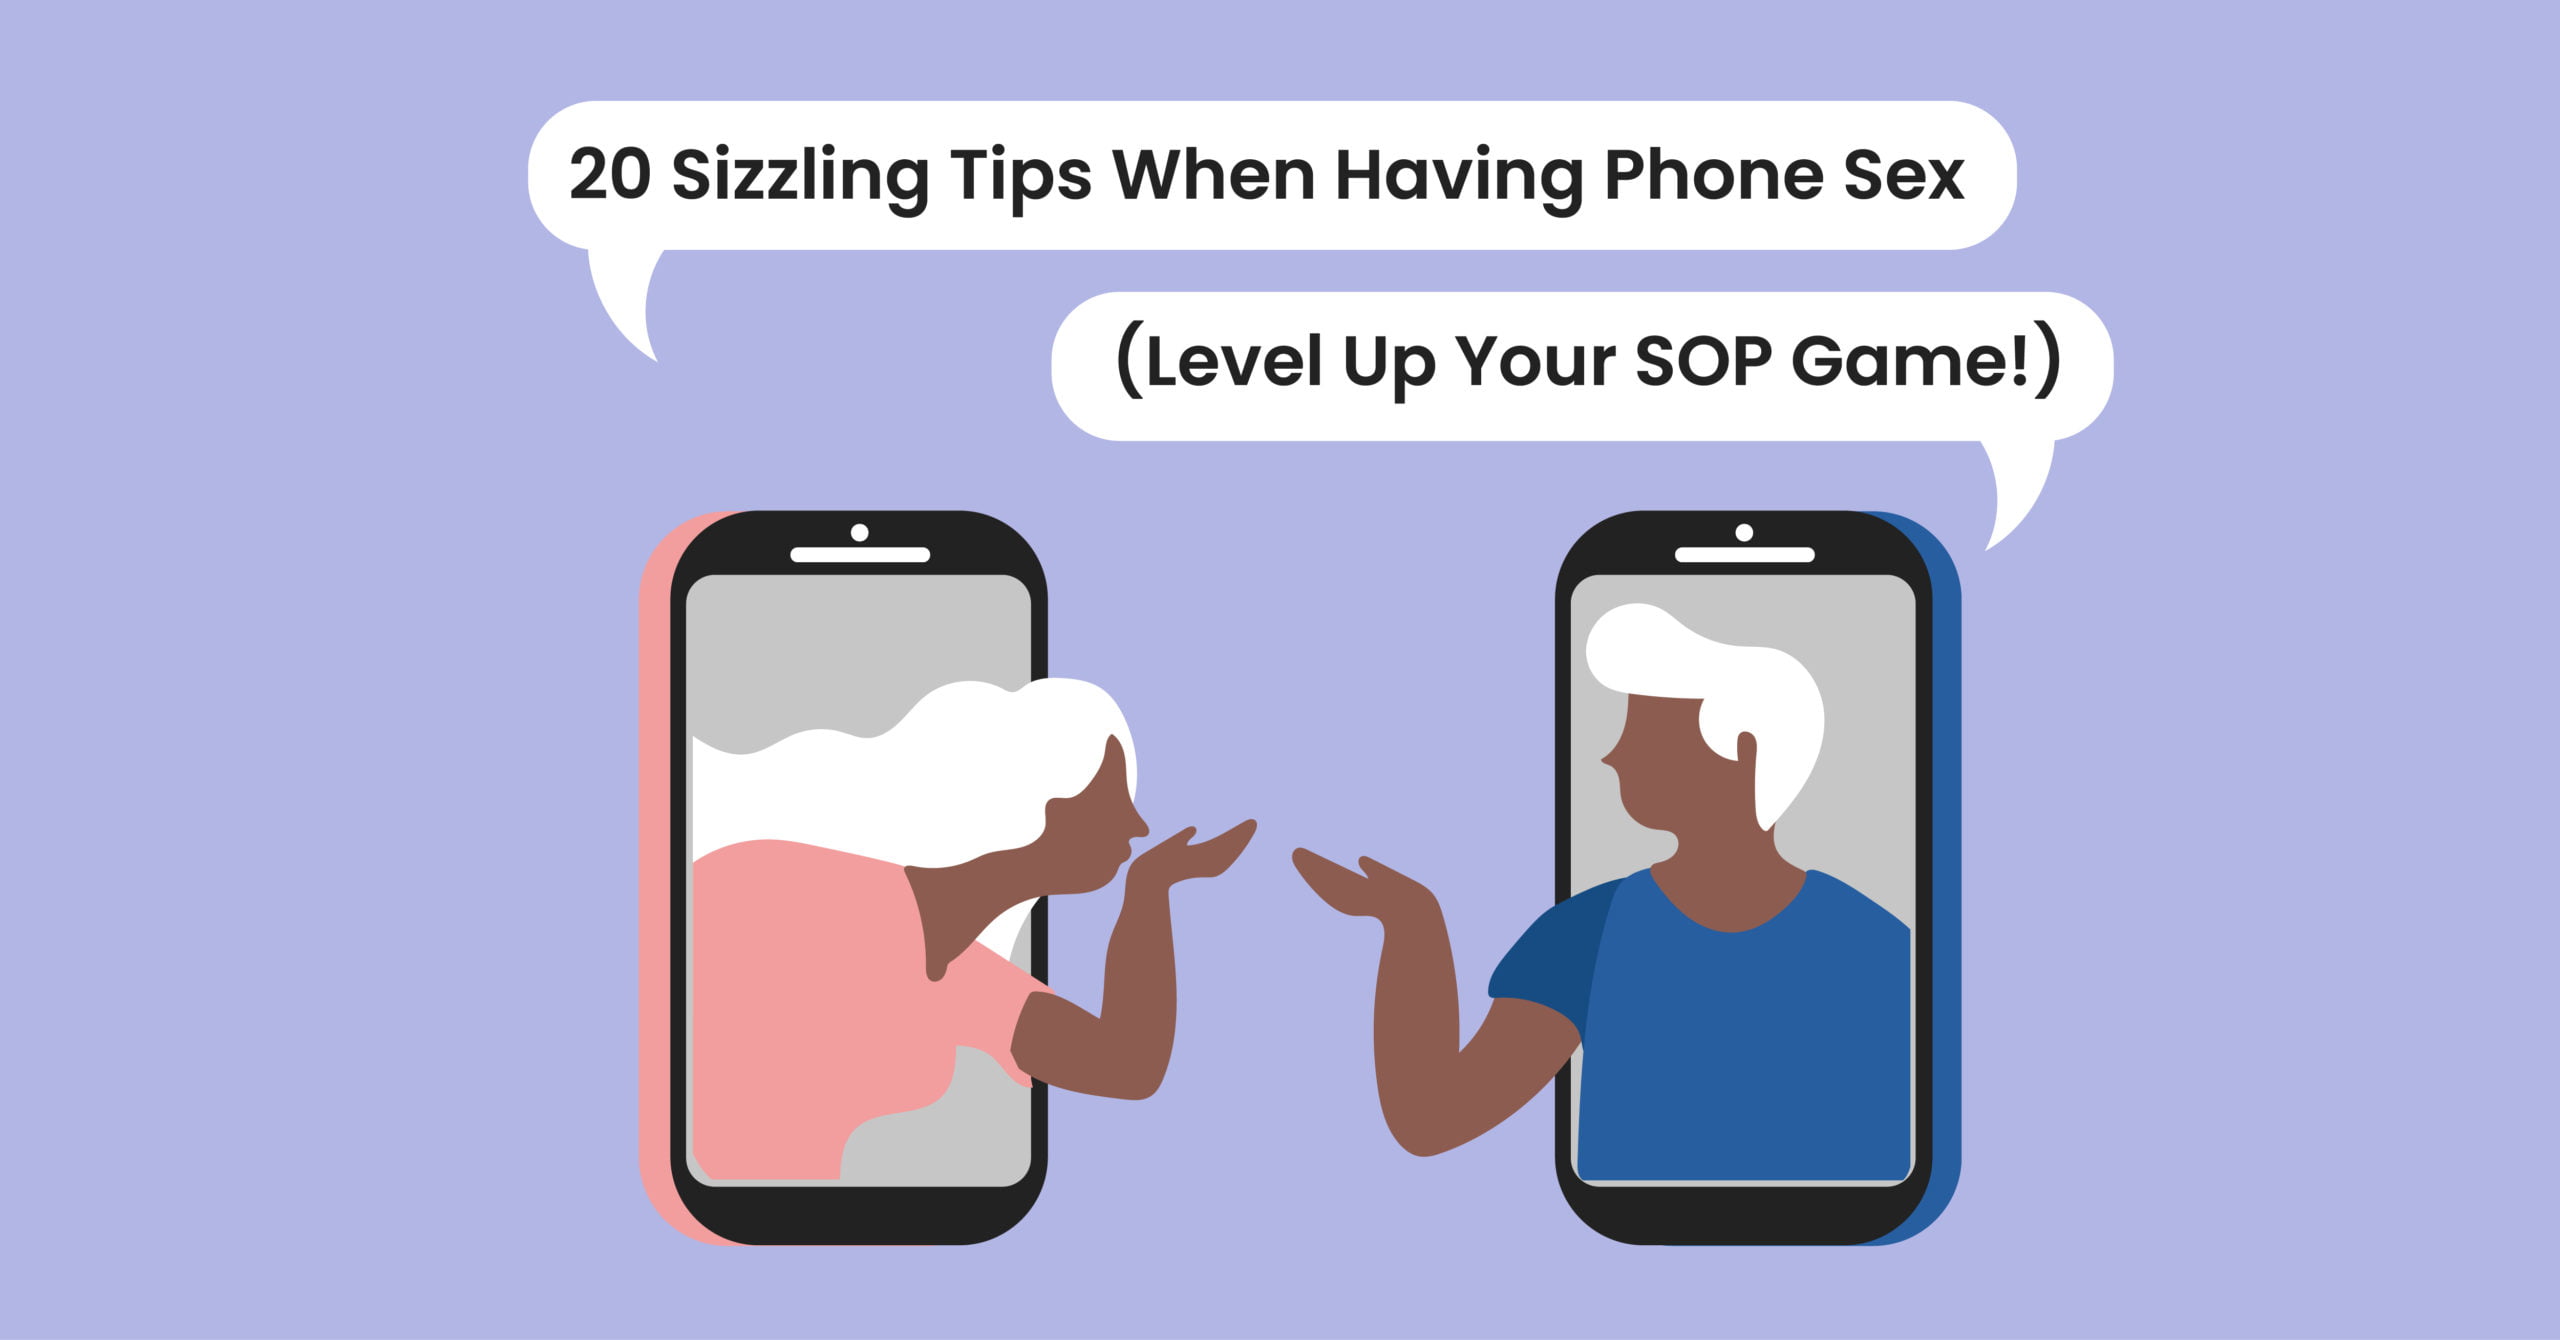 How to Have Phone Sex 30 Tips to Level Up Your SOP Game